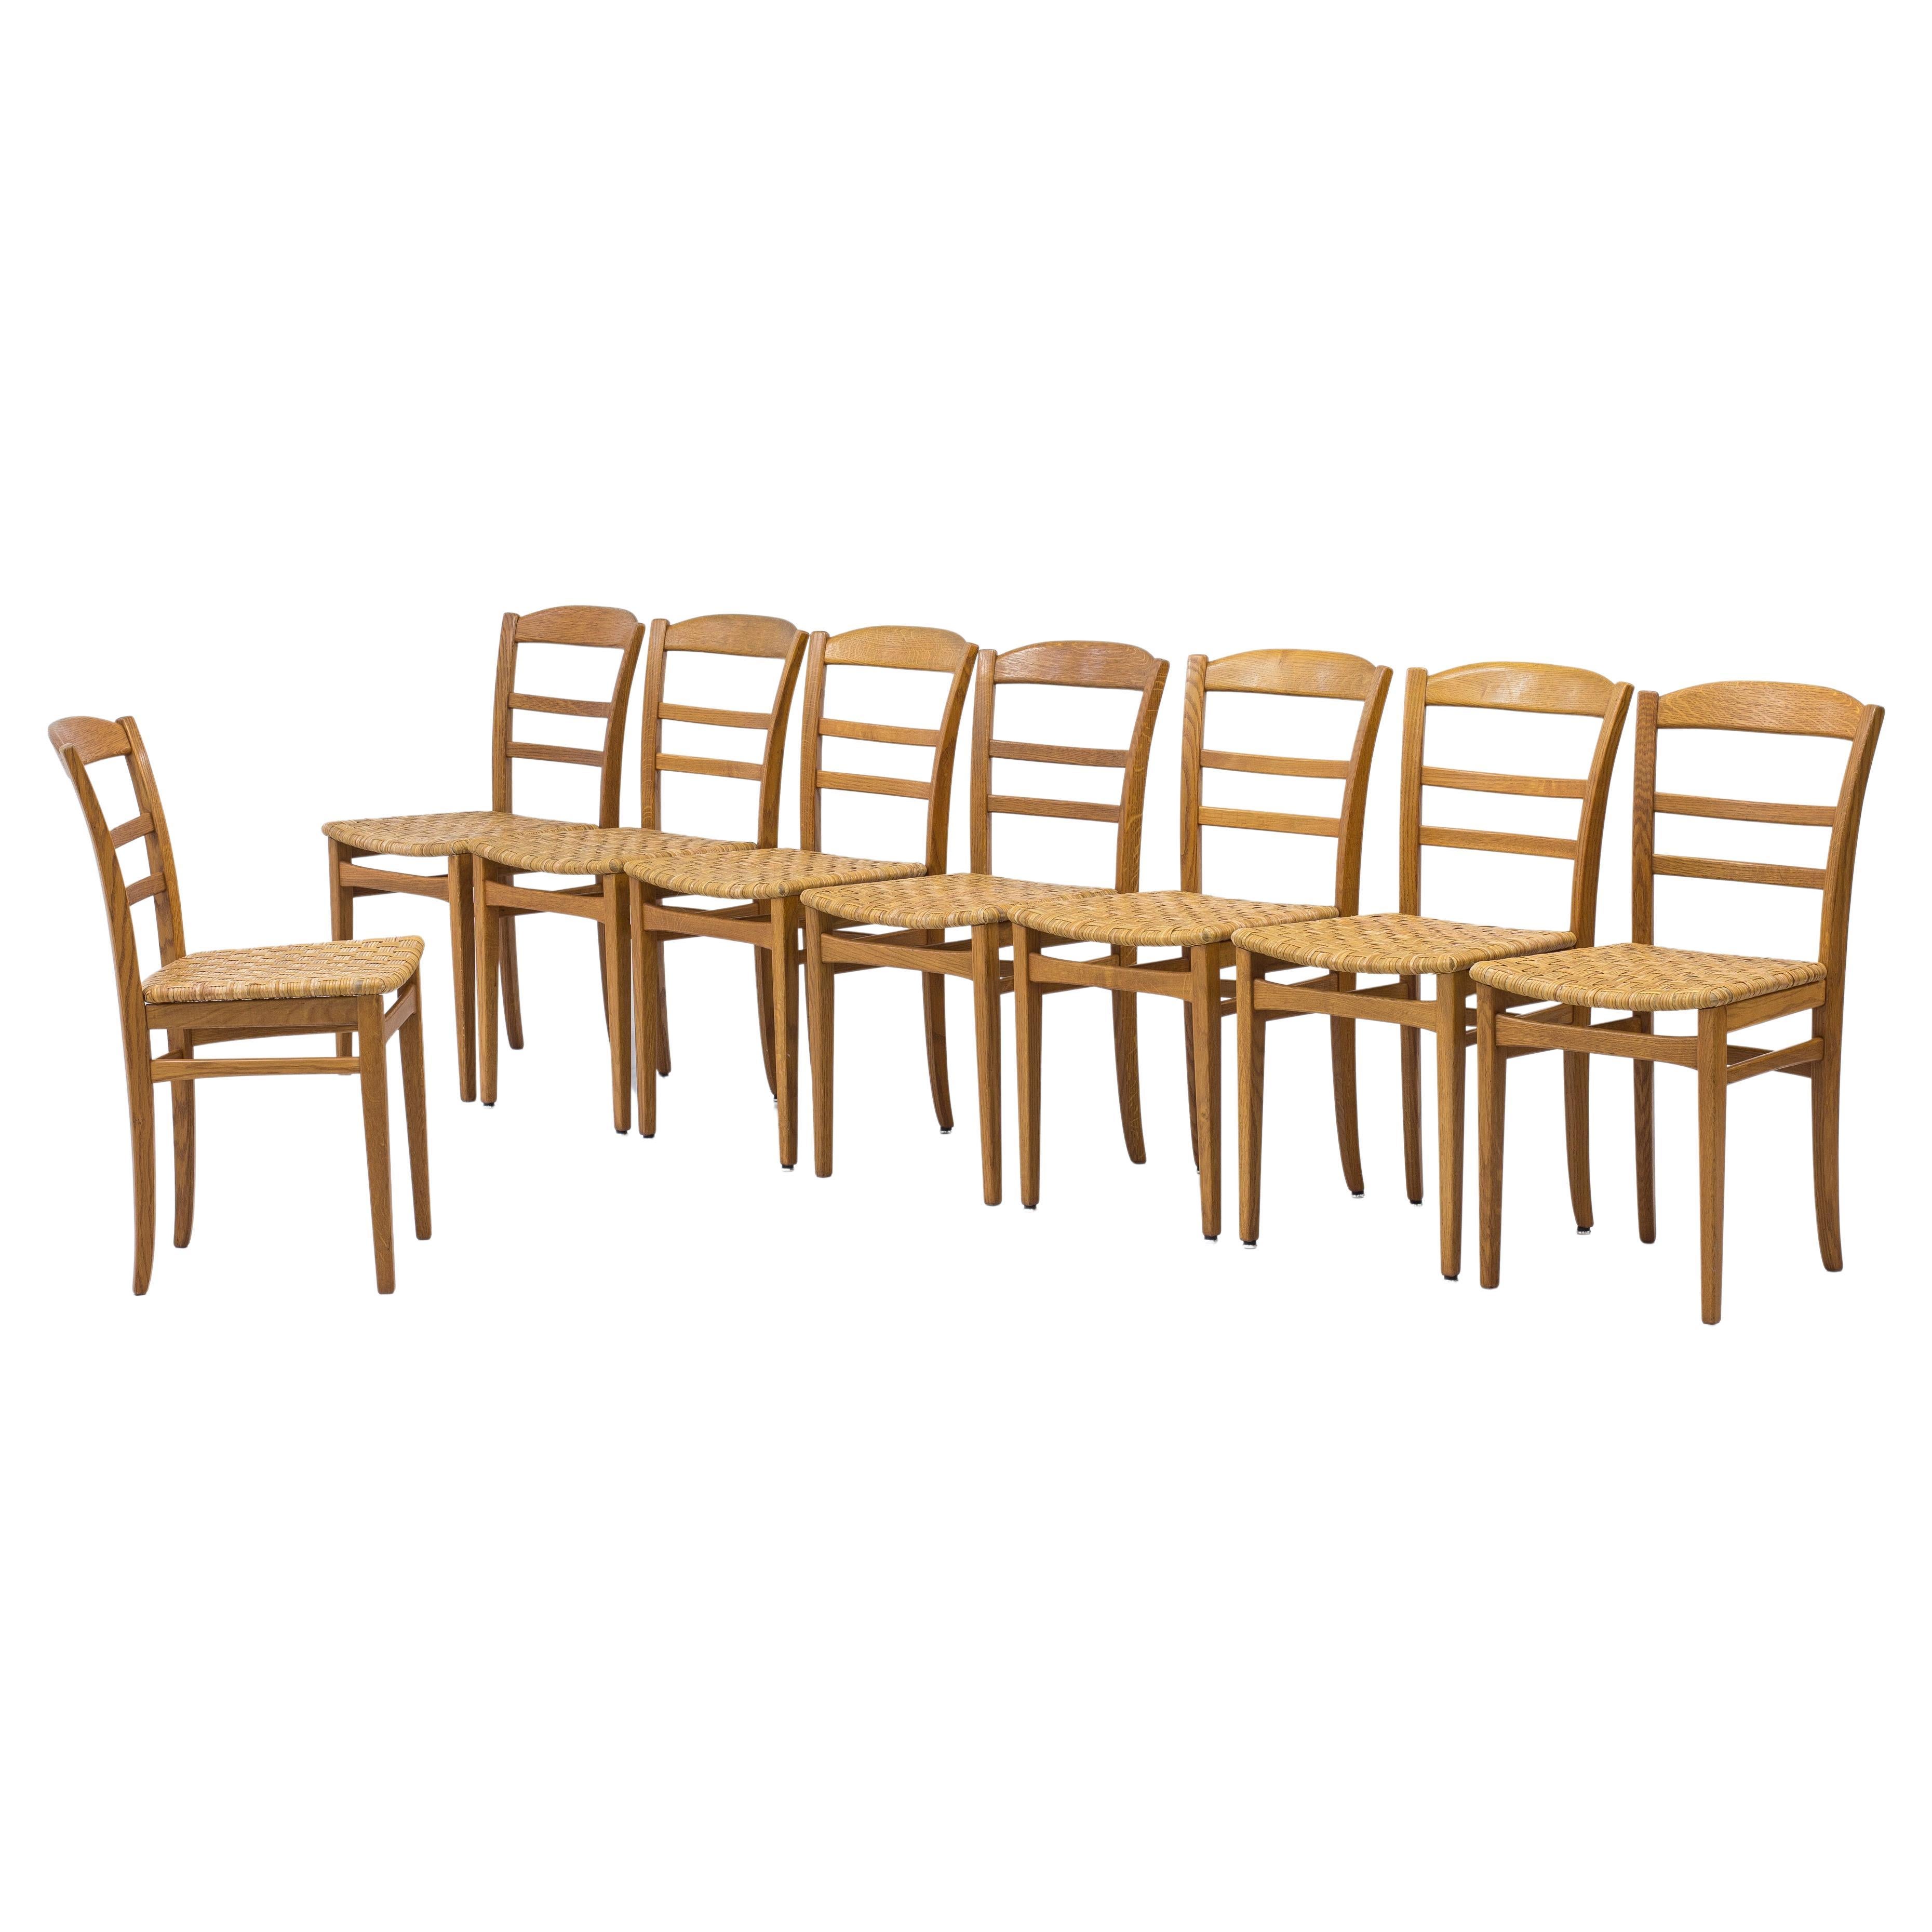 Oak and Cane Weave Dining Chairs by Carl Malmsten, Swedish Modern, 1950s For Sale